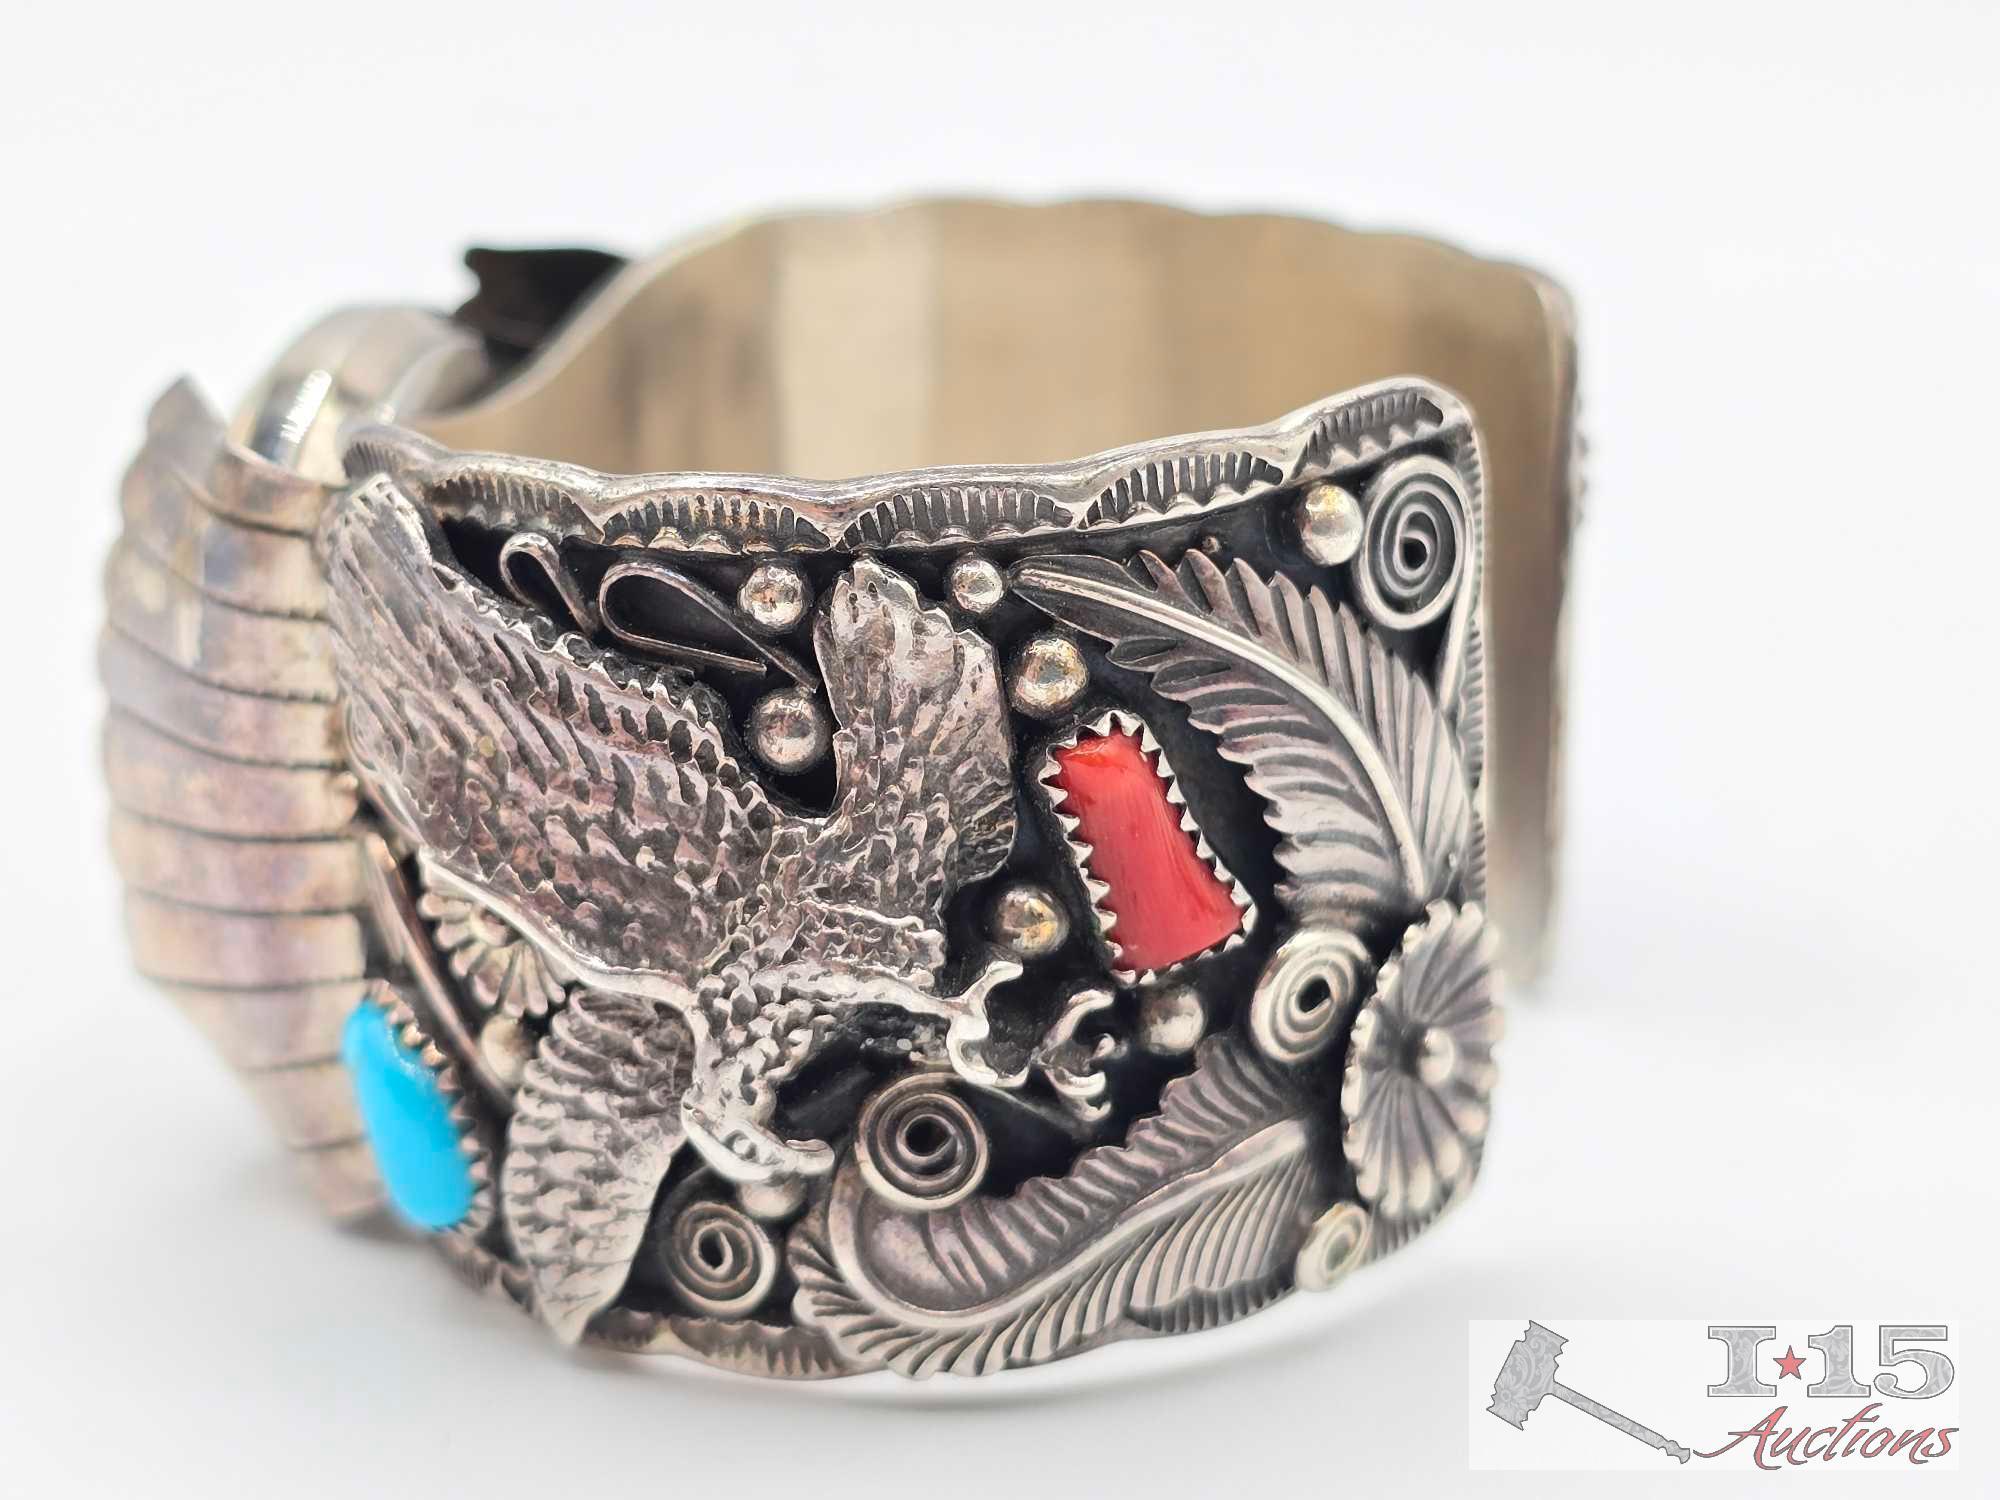 Sterling Silver Sharp Quartz Railroad Watch Cuff with Turquoise & Coral Accents, 93.75g